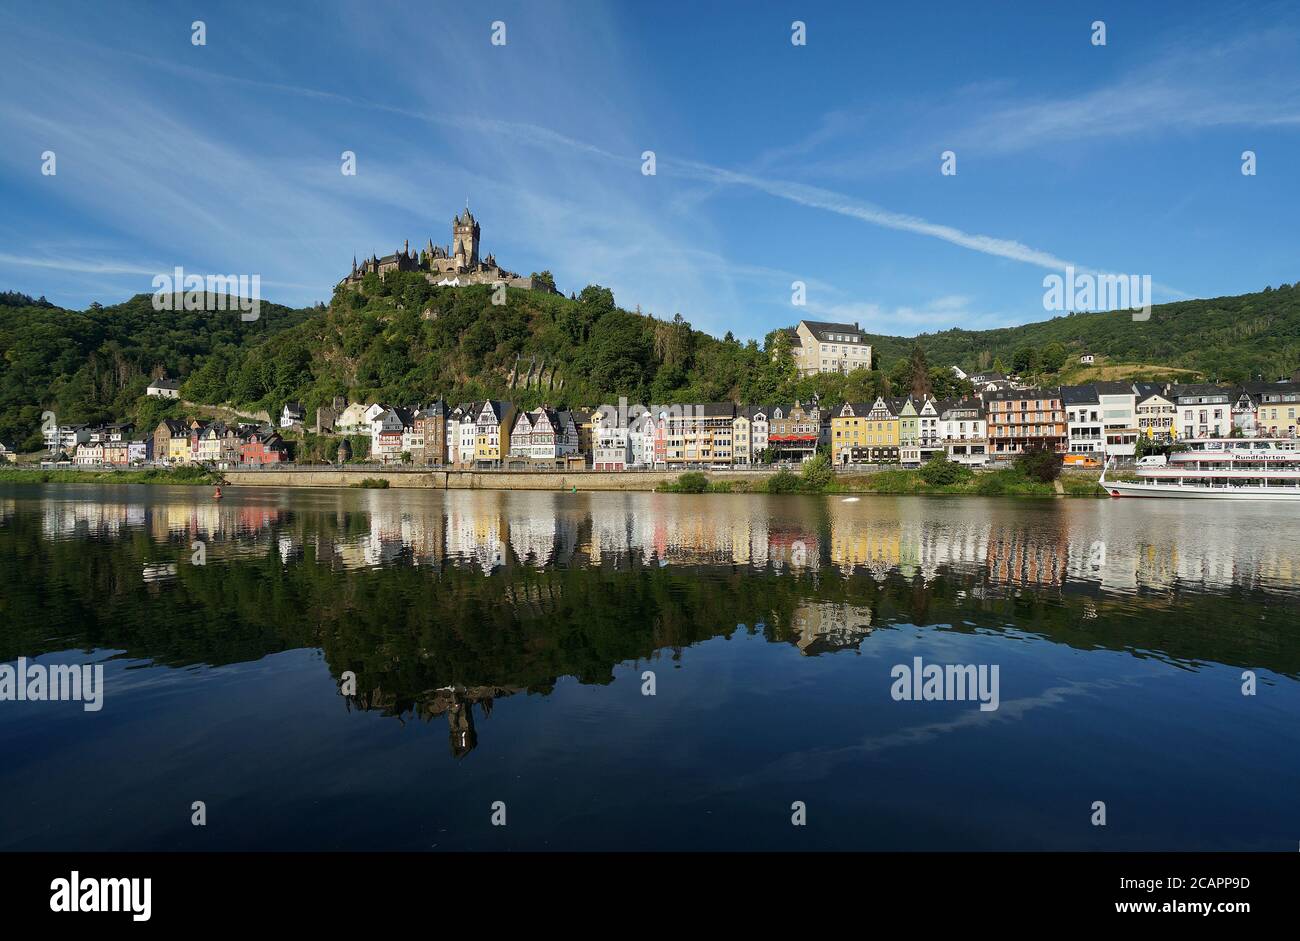 The village of Cochem and the Reichsburg seen from the opposite site of the river Moselle, Germany Stock Photo